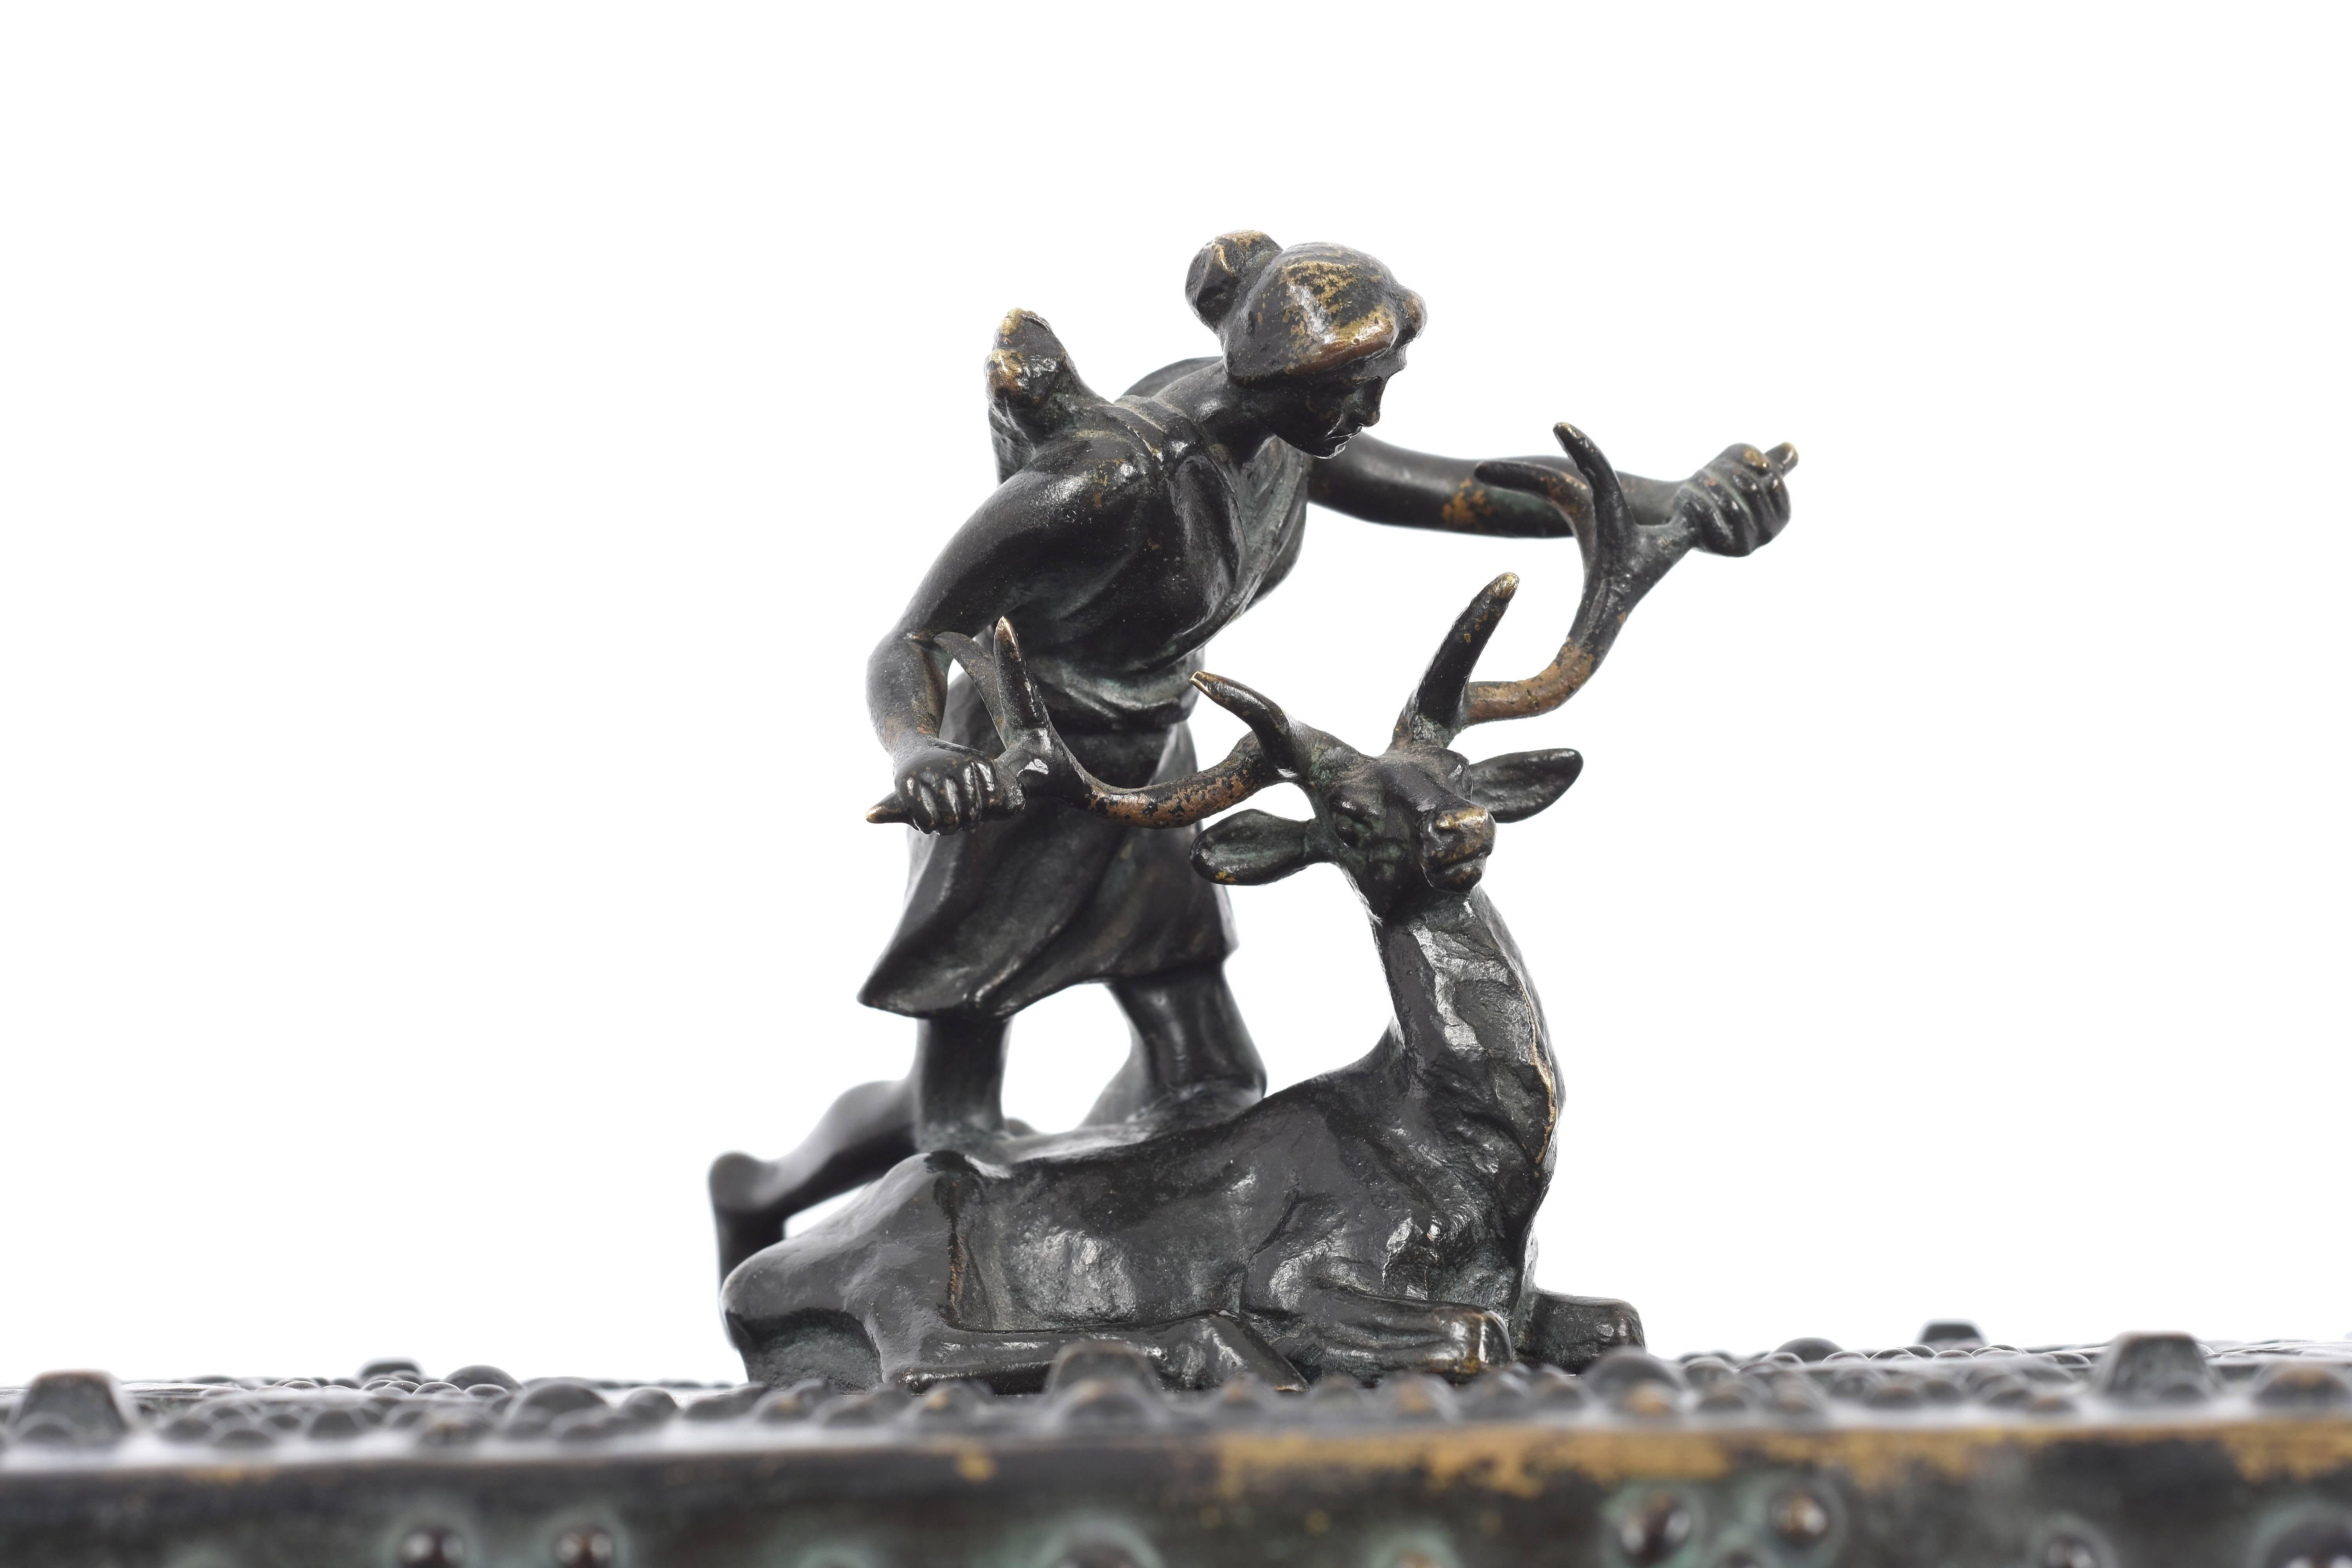 Bronze case inside pear wood from the early 1900s, signed Friedrich Gornik, Austria, 1877-1943
Sculpture depicting Diana Goddess of hunting with the deer. Hunting scenes. The handles are two squirrels.
Dimensions: 32 x 19 cm, maximum height 21 cm,